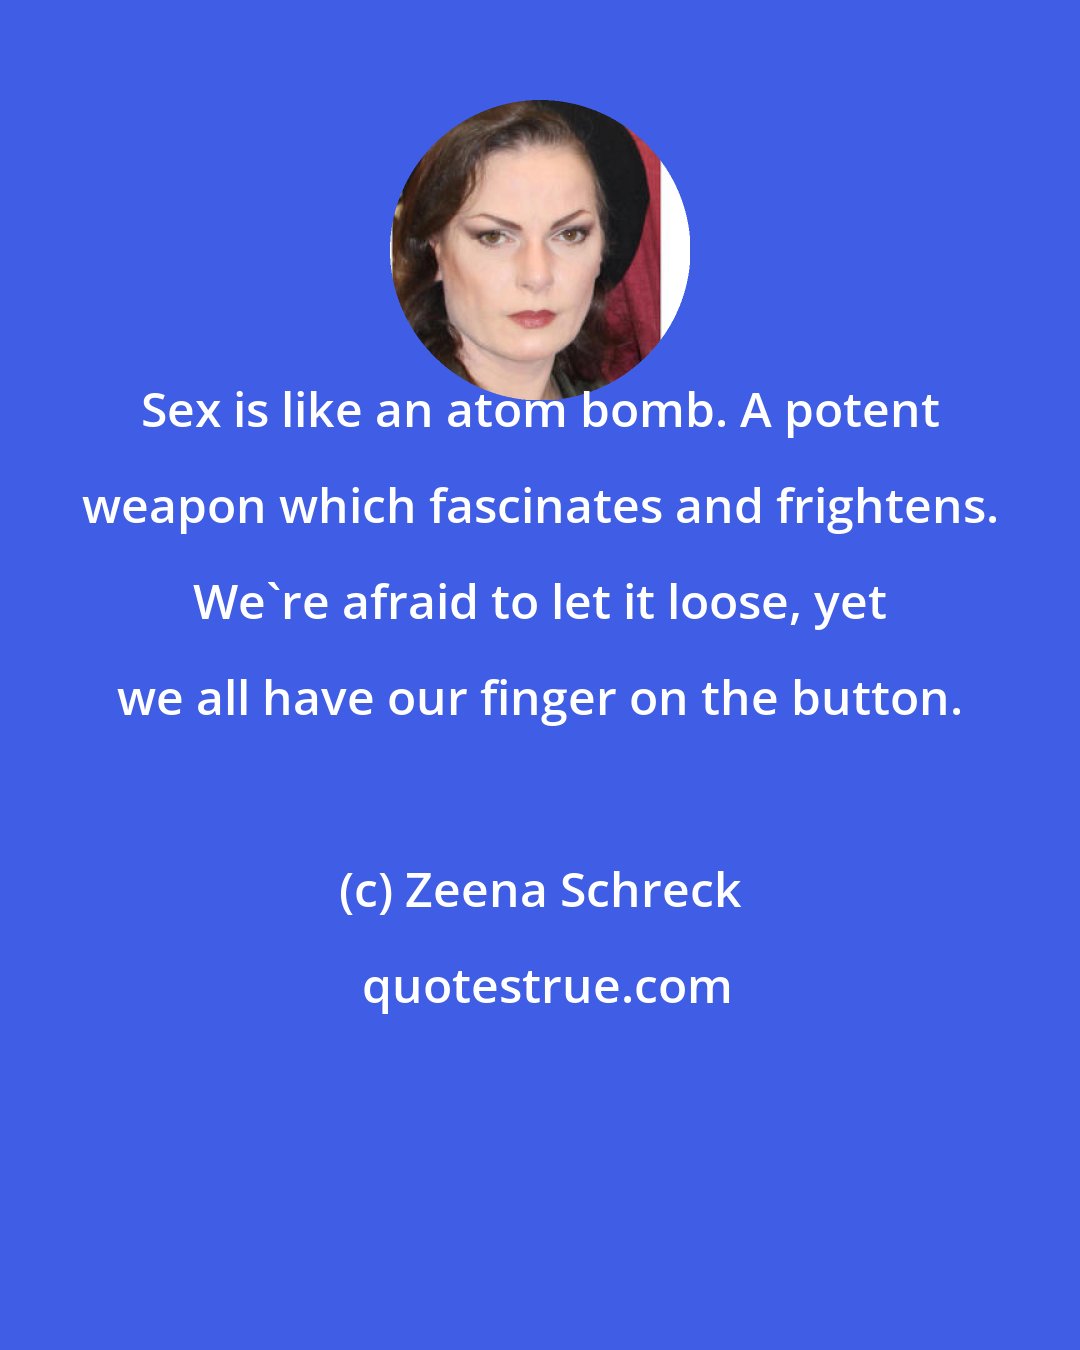 Zeena Schreck: Sex is like an atom bomb. A potent weapon which fascinates and frightens. We're afraid to let it loose, yet we all have our finger on the button.